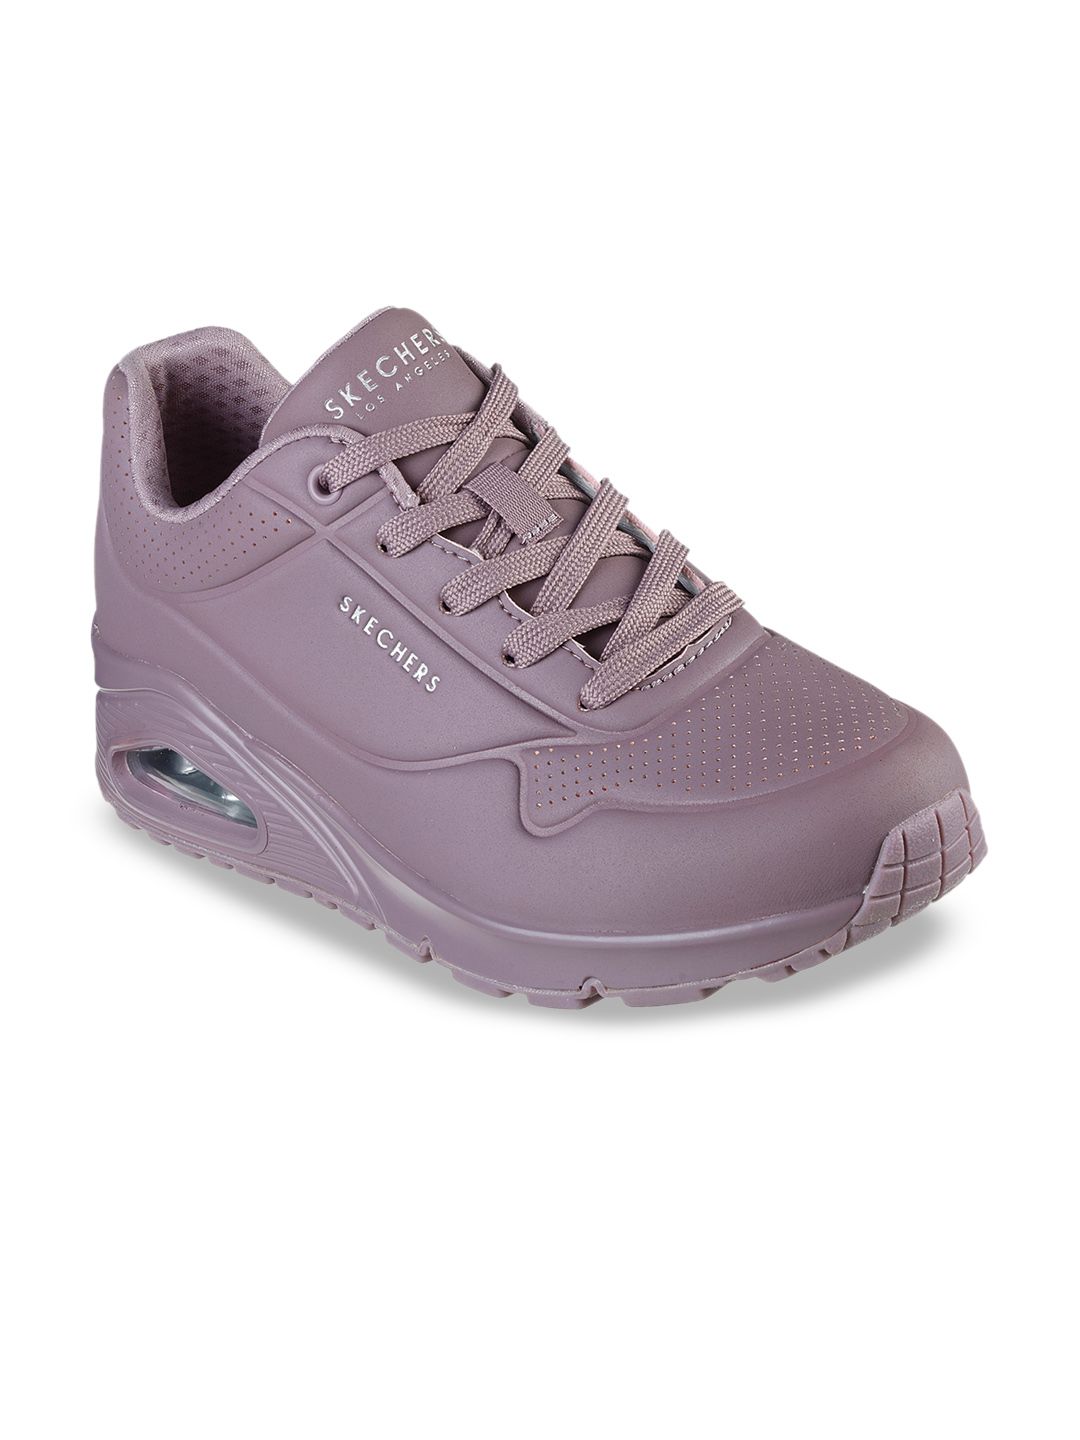 Skechers Women UNO - STAND ON AIR Lace-Up Casual Sneakers Price in India